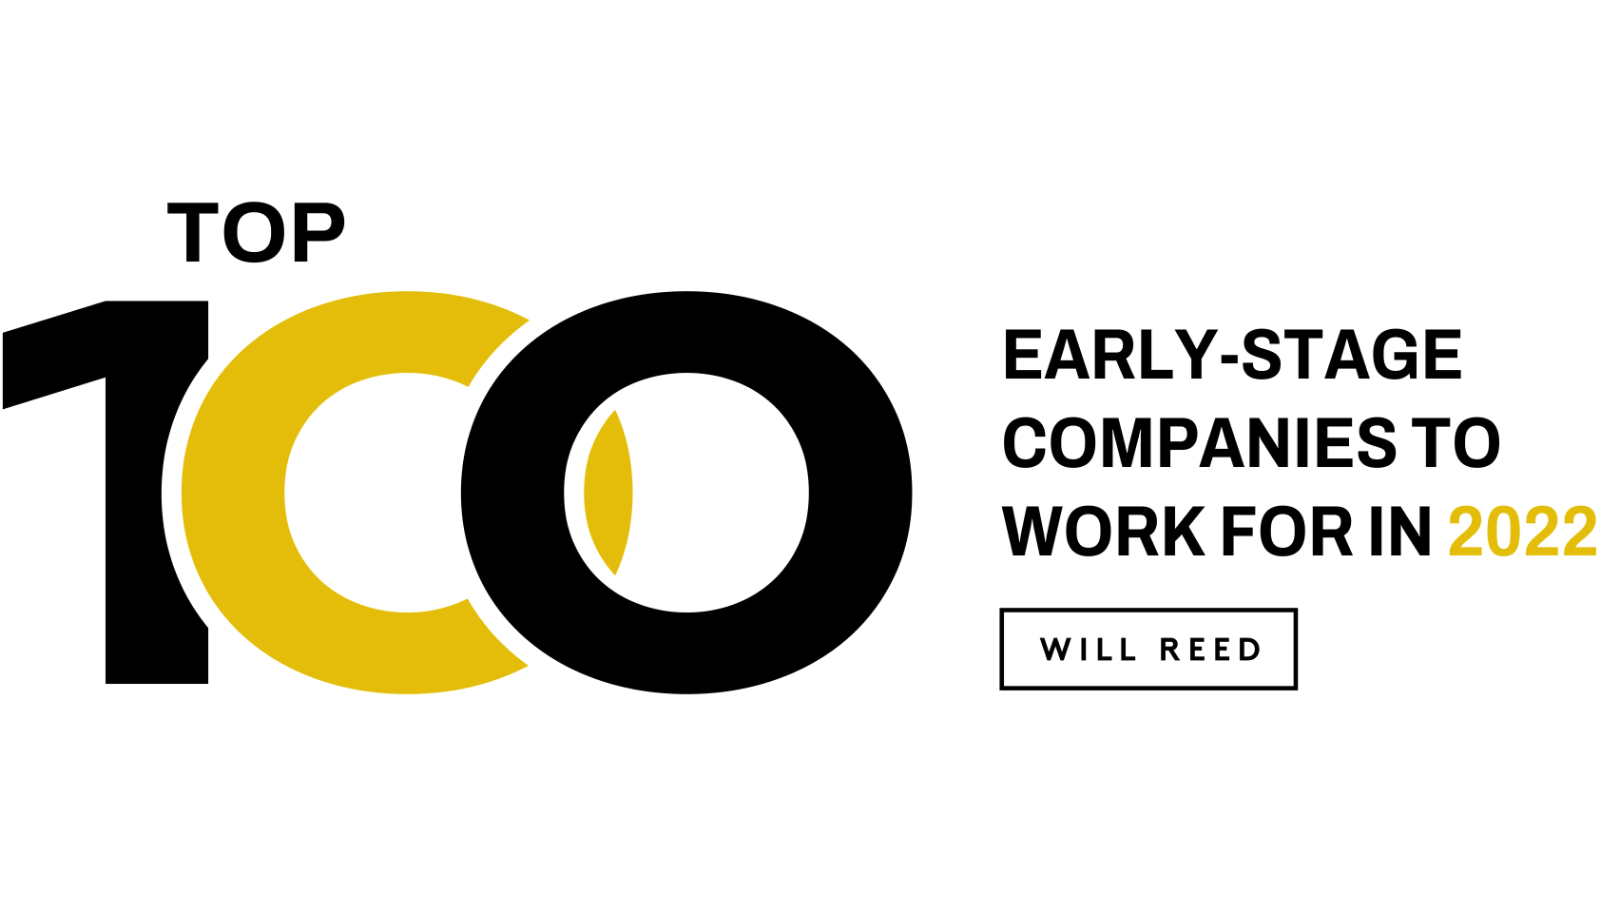 will reed top 100 early stage companies to work for logo